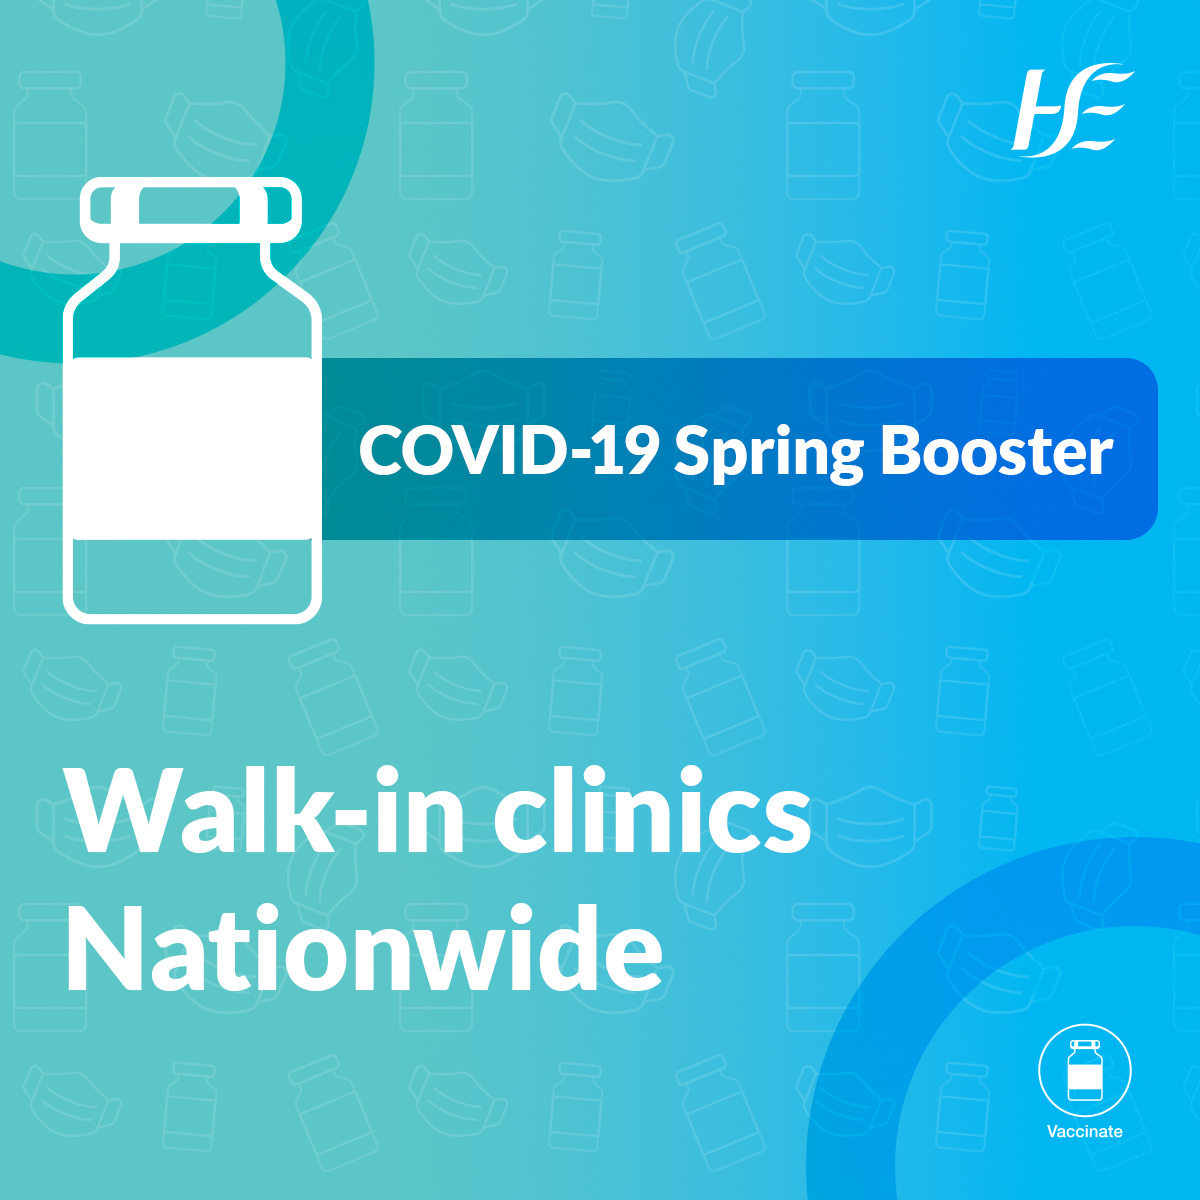 If you’re 70 or over or you have a weak immune system, you can get your COVID-19 Spring Booster at a walk-in vaccination clinic this weekend. No appointment needed. For clinic times and more information, visit: bit.ly/42wKqzR #COVIDVaccine